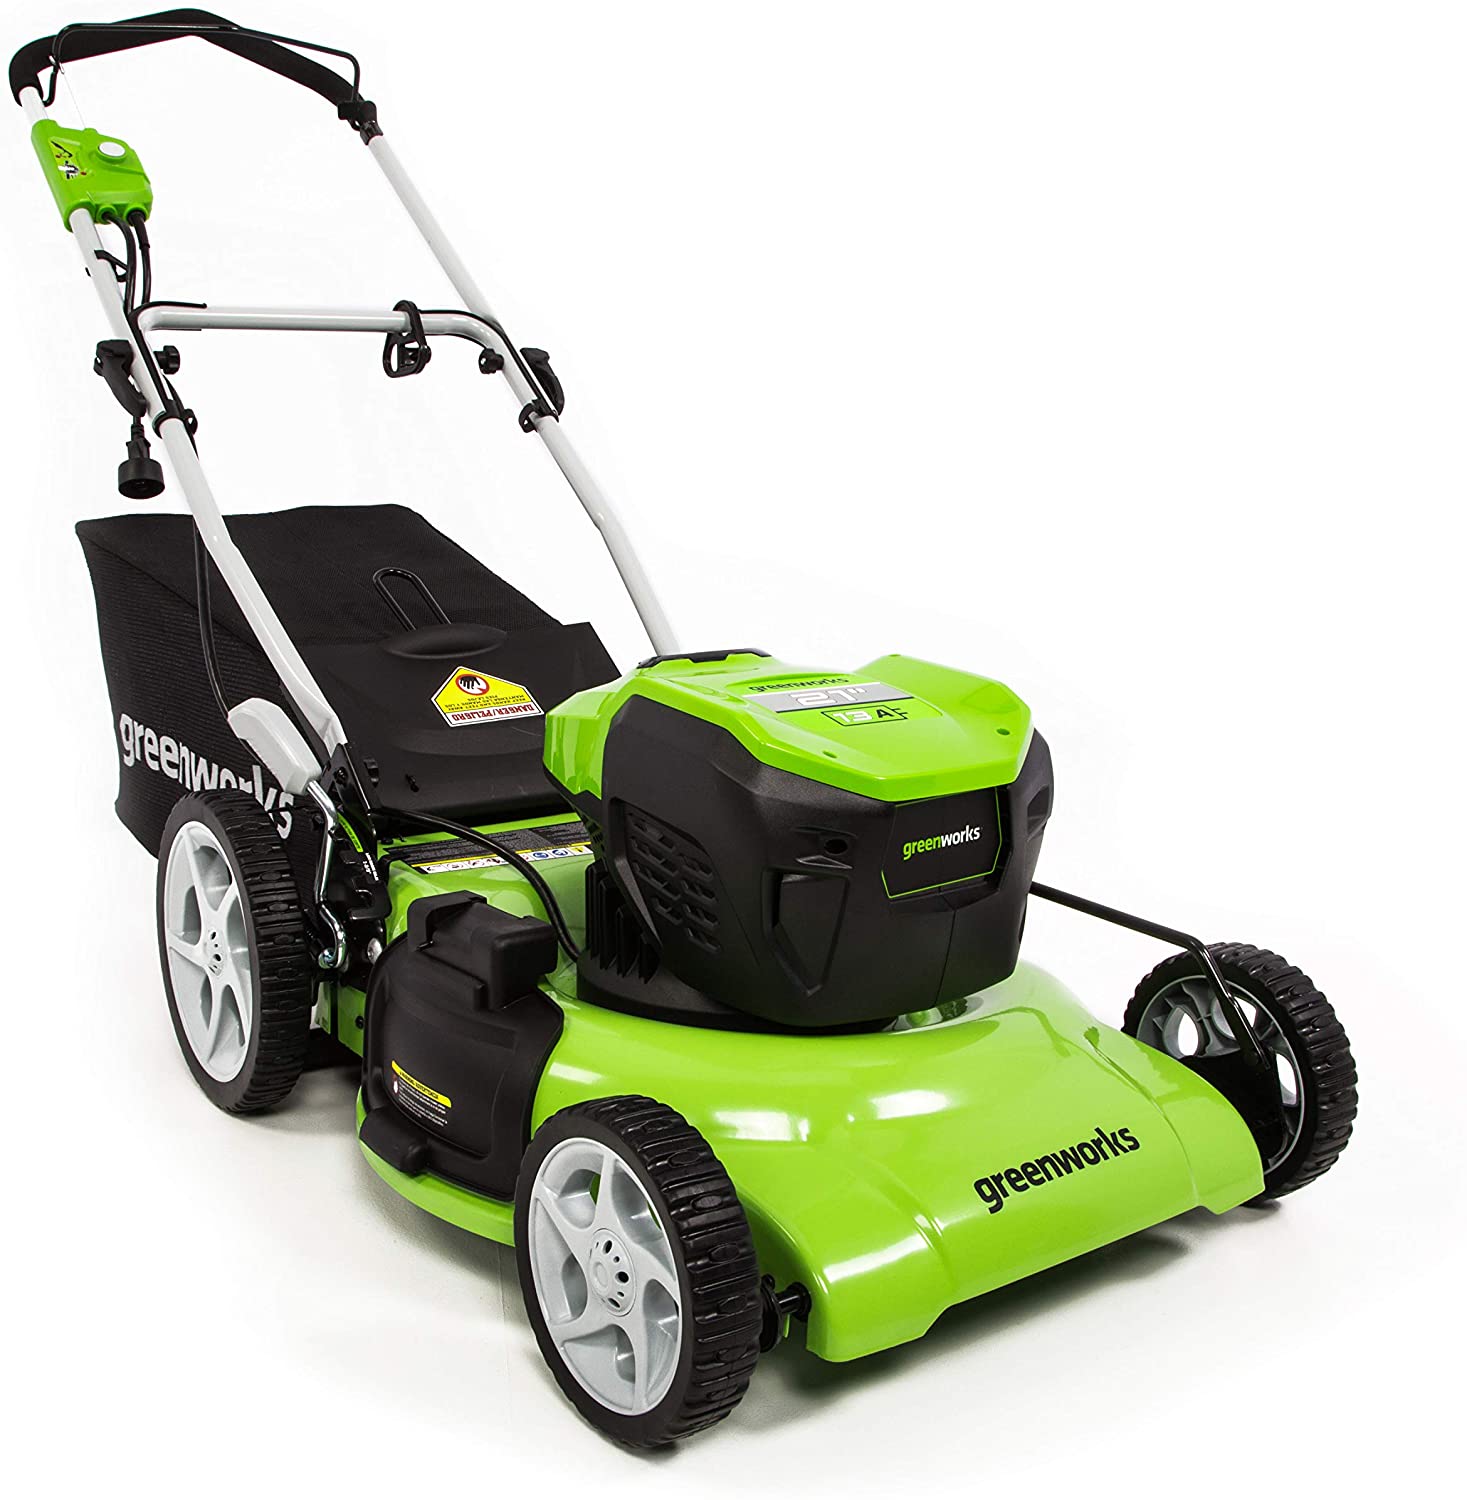 Top 10 Best Lawn Mower Under 200 Reviews Brand Review